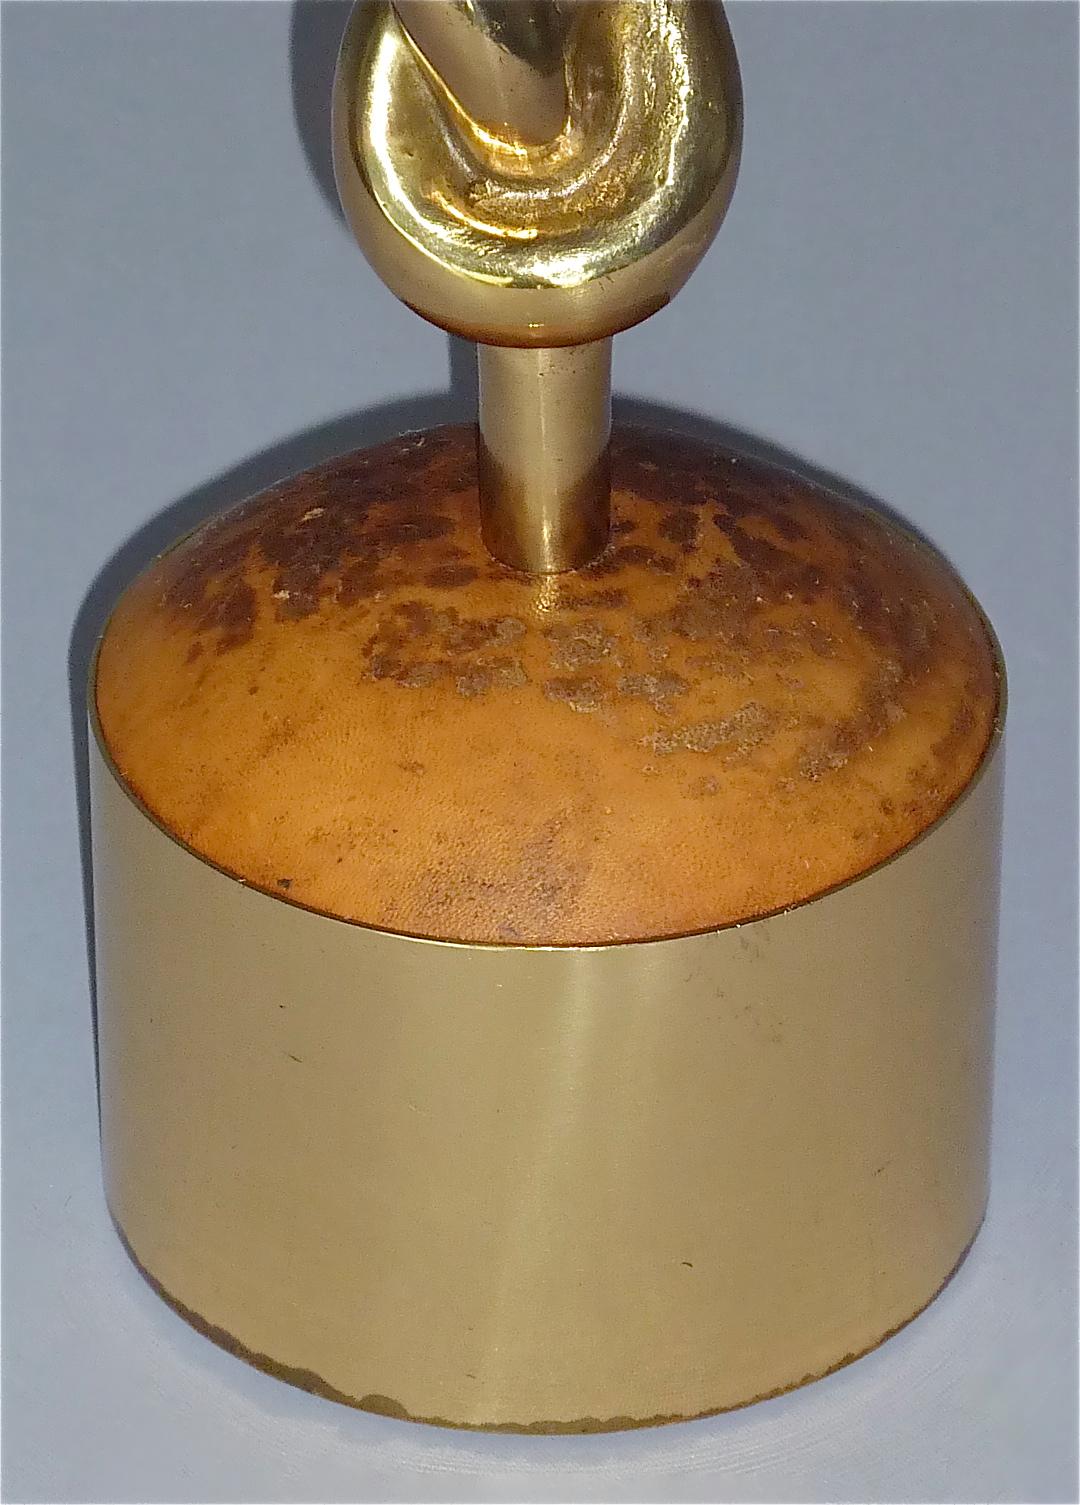 Sculptural Gilt Bronze Leather Knotted Table Lamp French 1970s Jansen Pergay Era For Sale 3